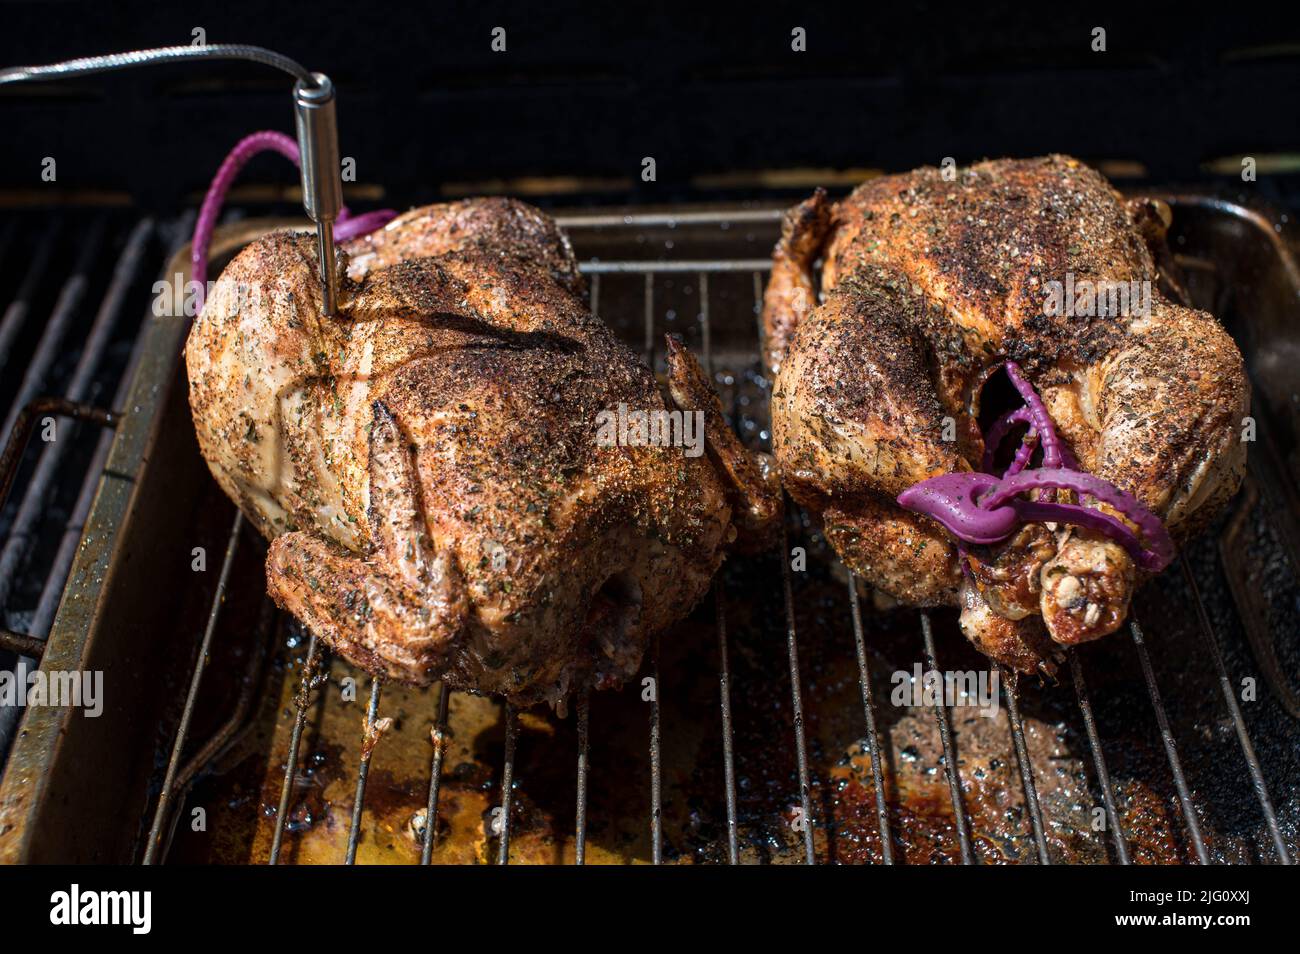 https://c8.alamy.com/comp/2JG0XXJ/grilled-chicken-on-a-barbecue-grill-with-meat-thermometer-2JG0XXJ.jpg